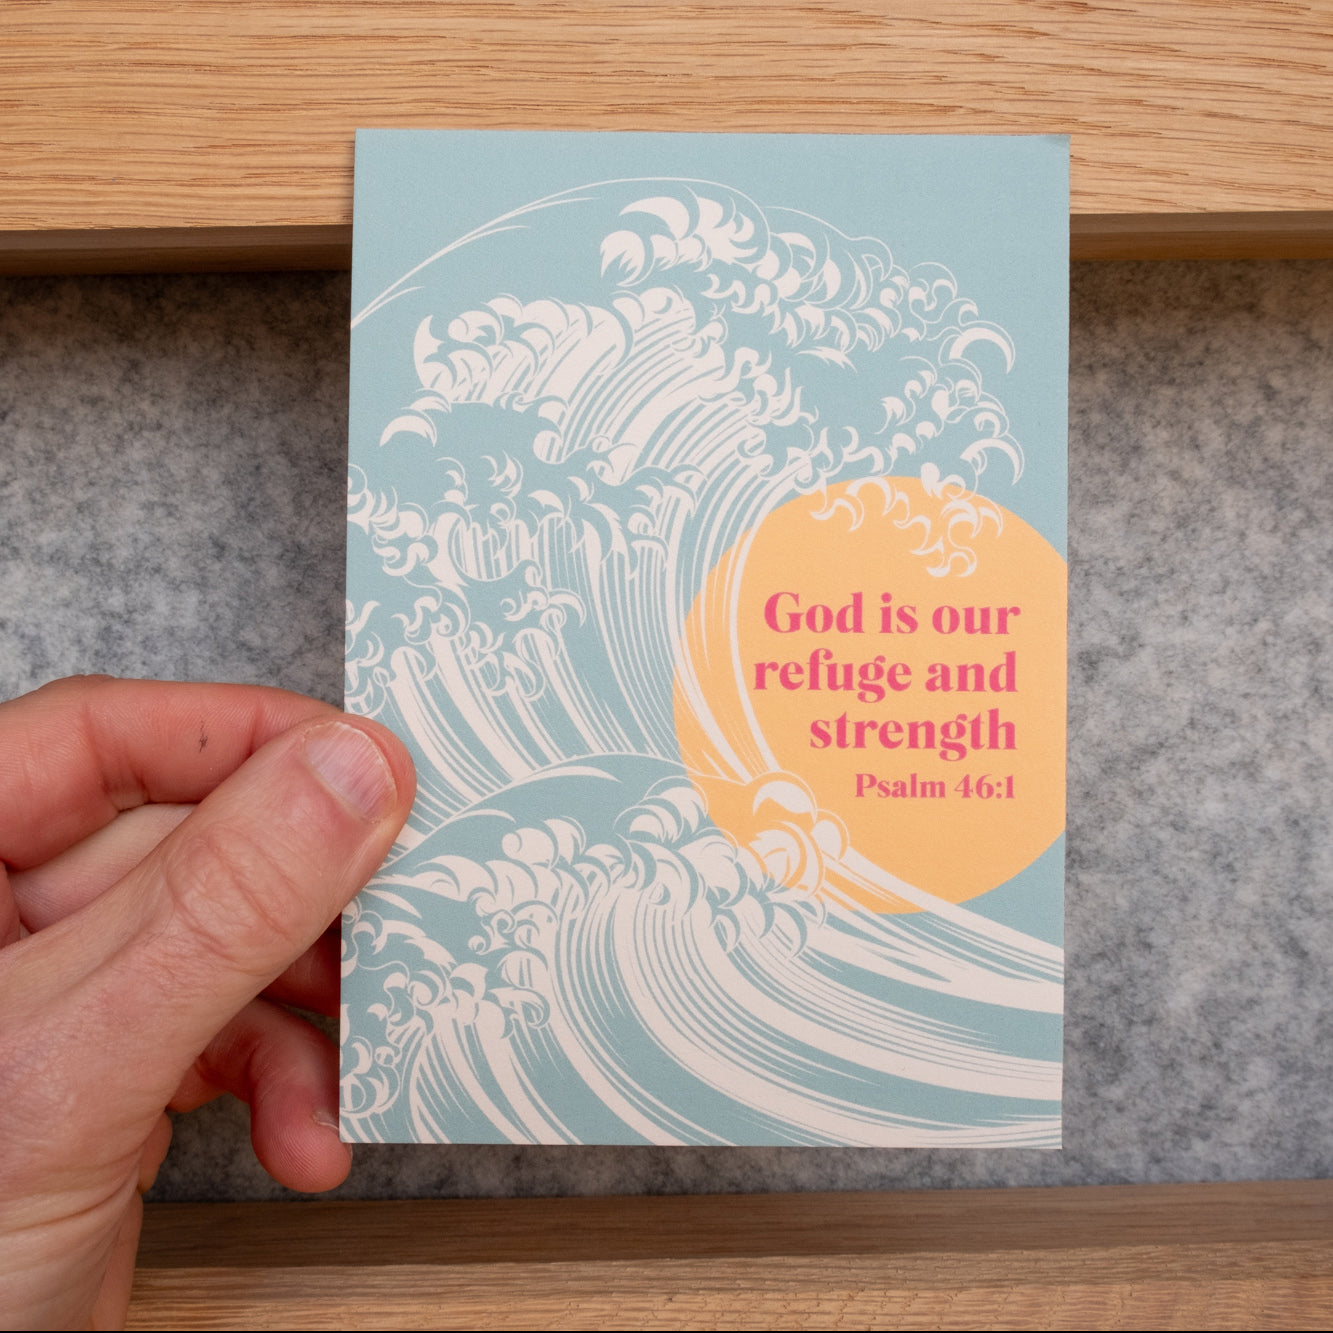 Set of Christian Postcards. 'God is our refuge and strength" - Psalm 46 verse 1